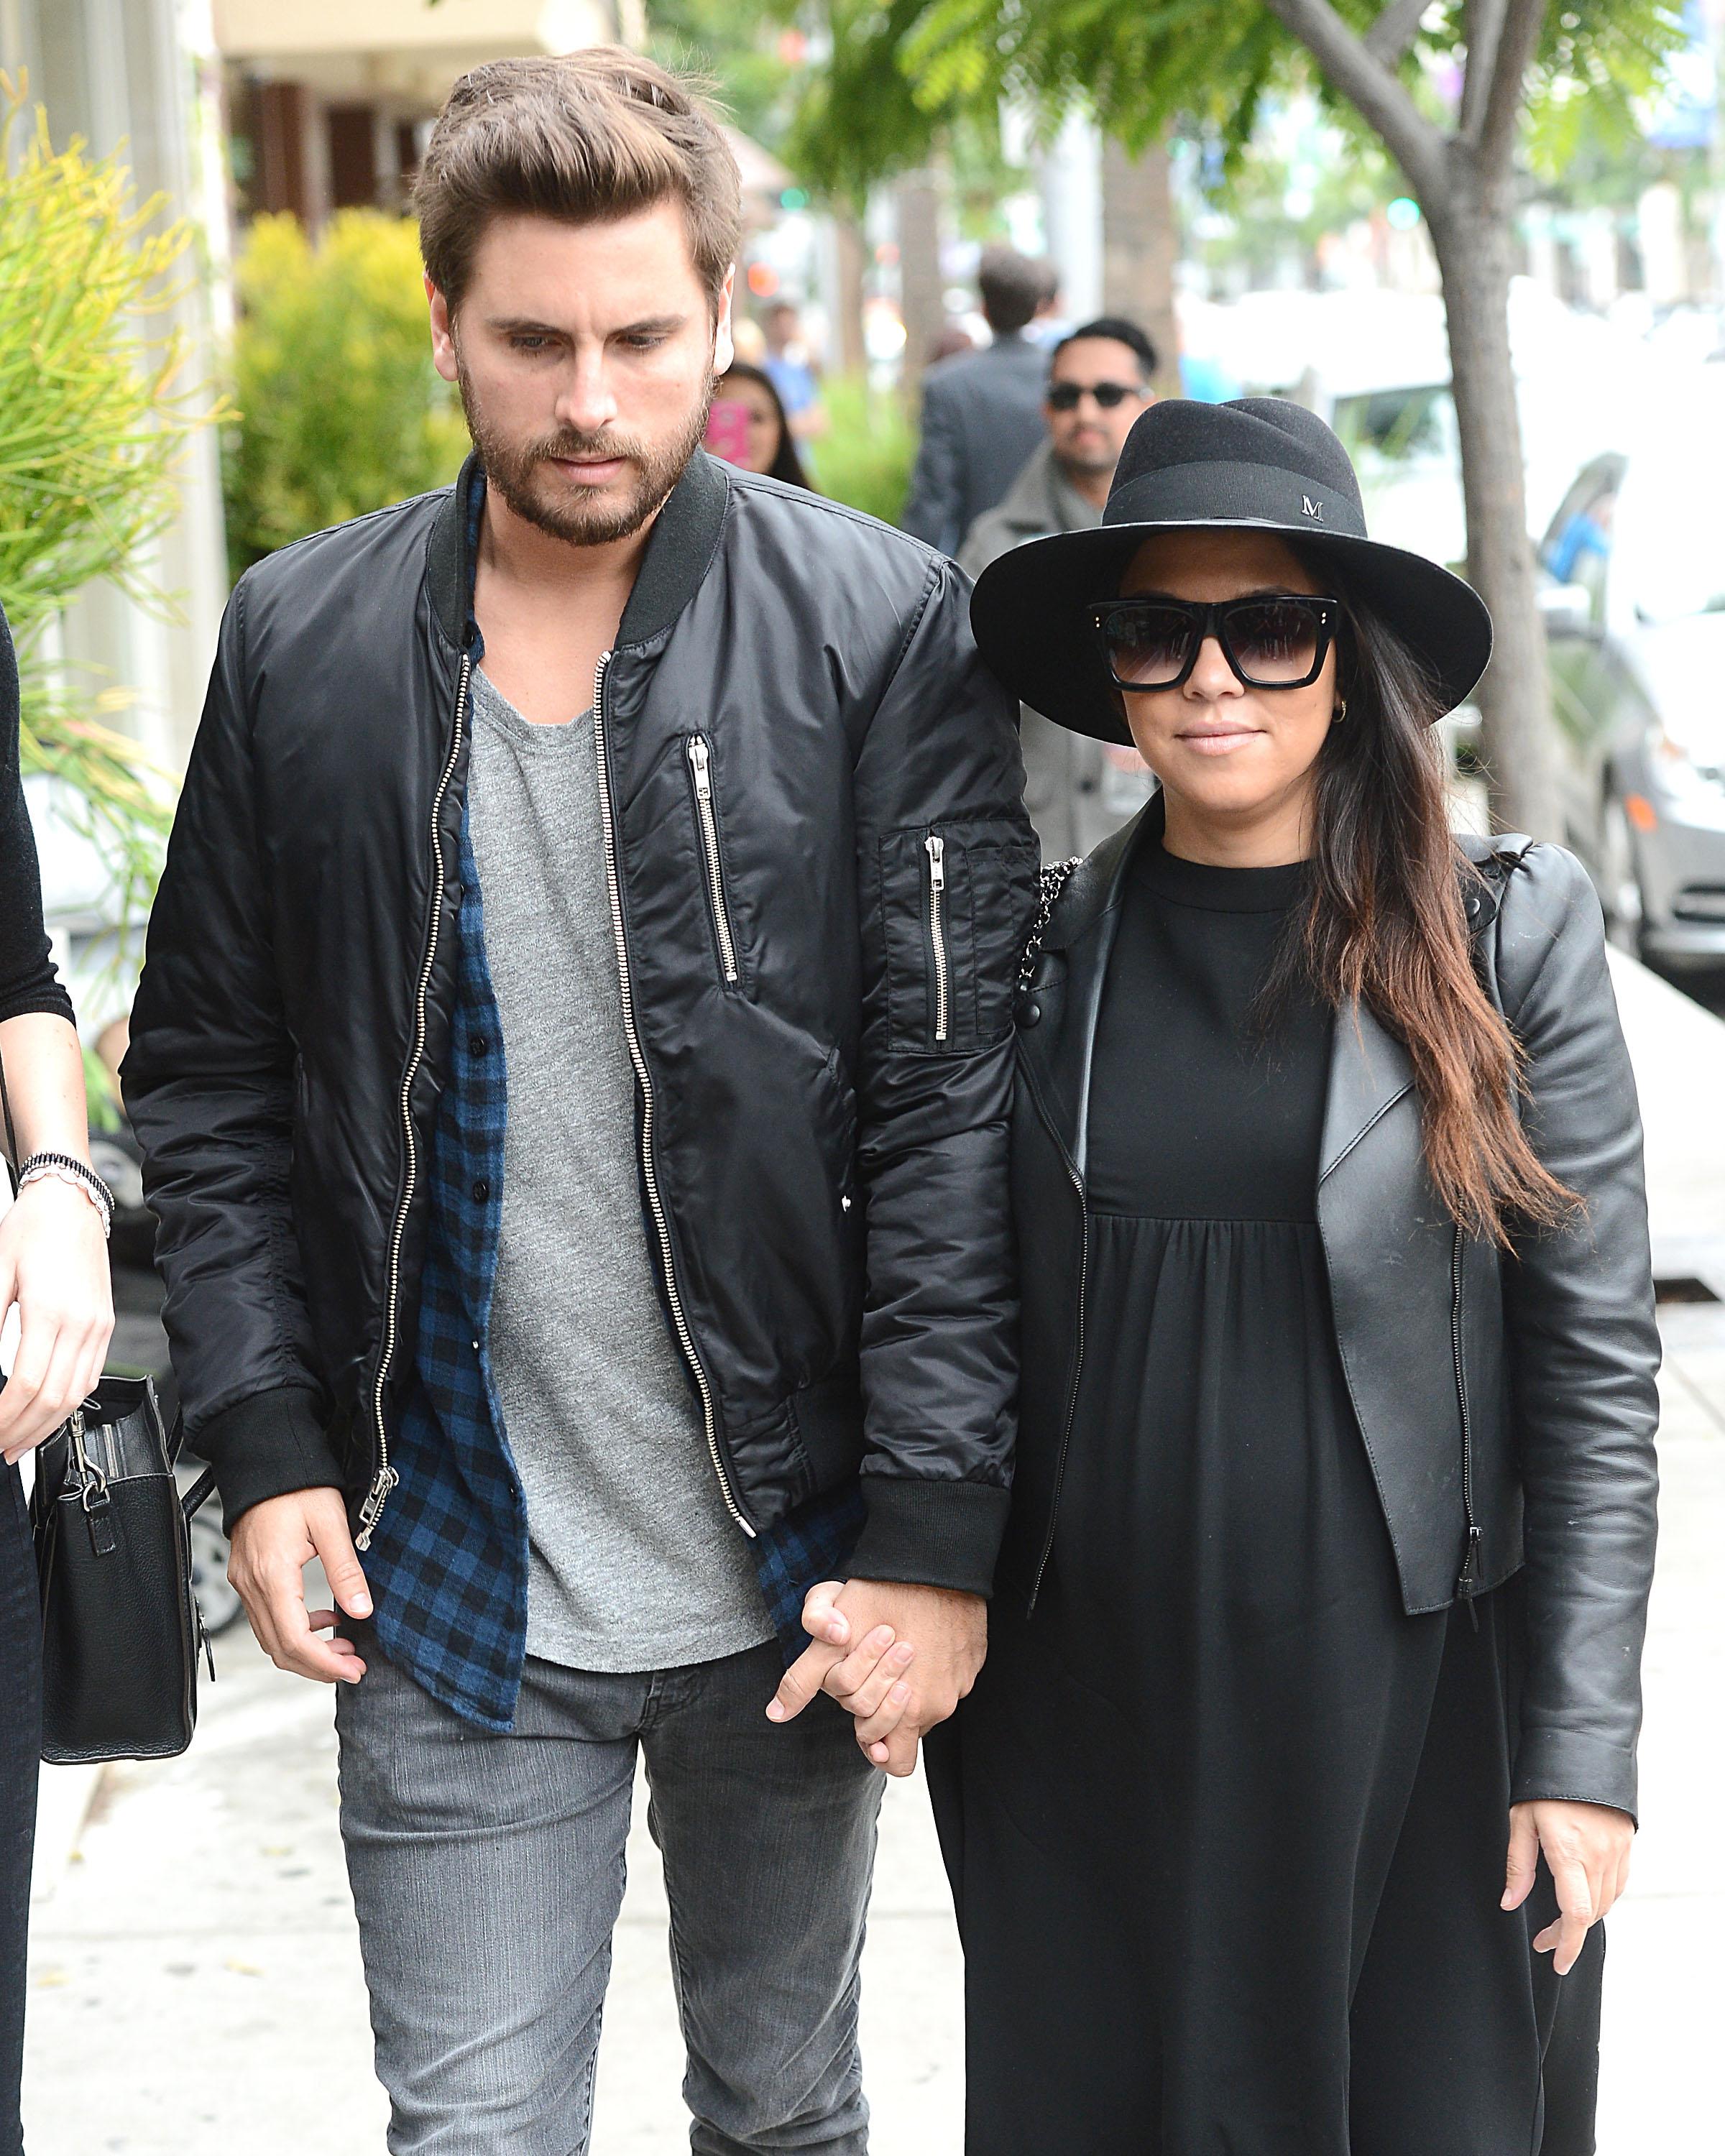 Kourtney Kardashian, Scott Disick and Kendall Jenner have lunch in Beverly Hills